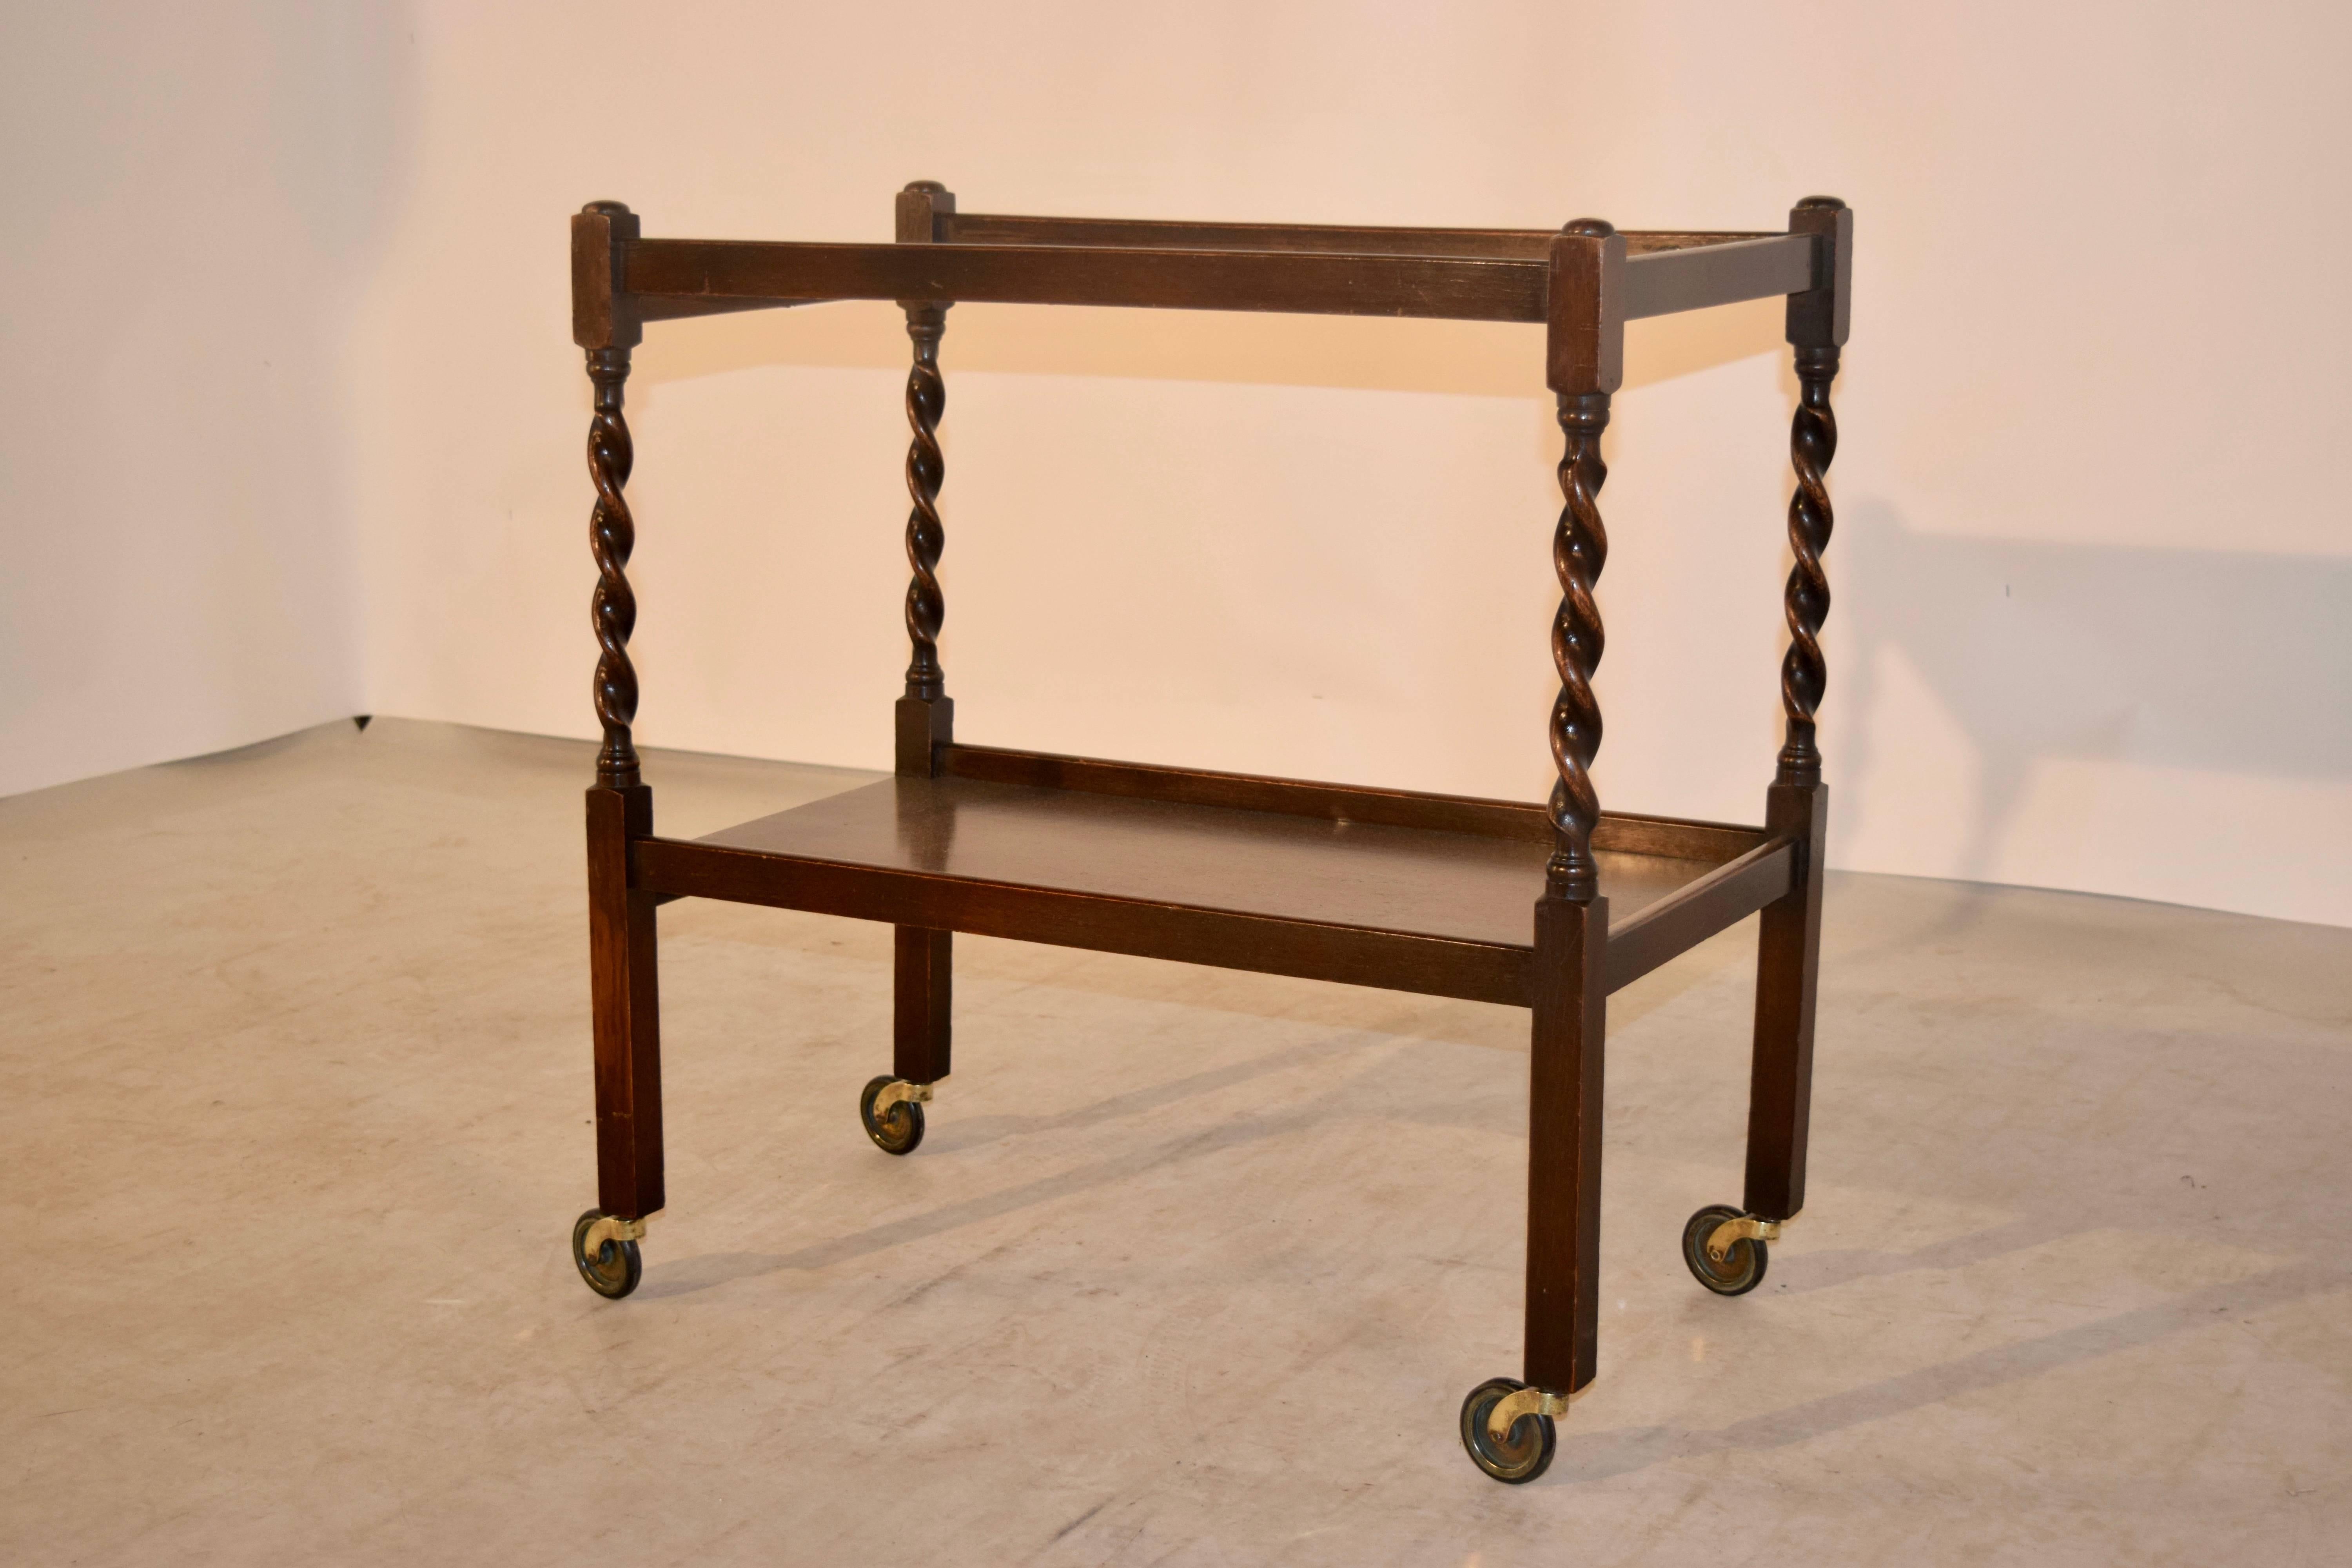 English oak drink cart, circa 1900. This cart has two shelves, separated by hand turned barley twist shelf supports, and straight legs at the bottom for contrast. Raised on casters.